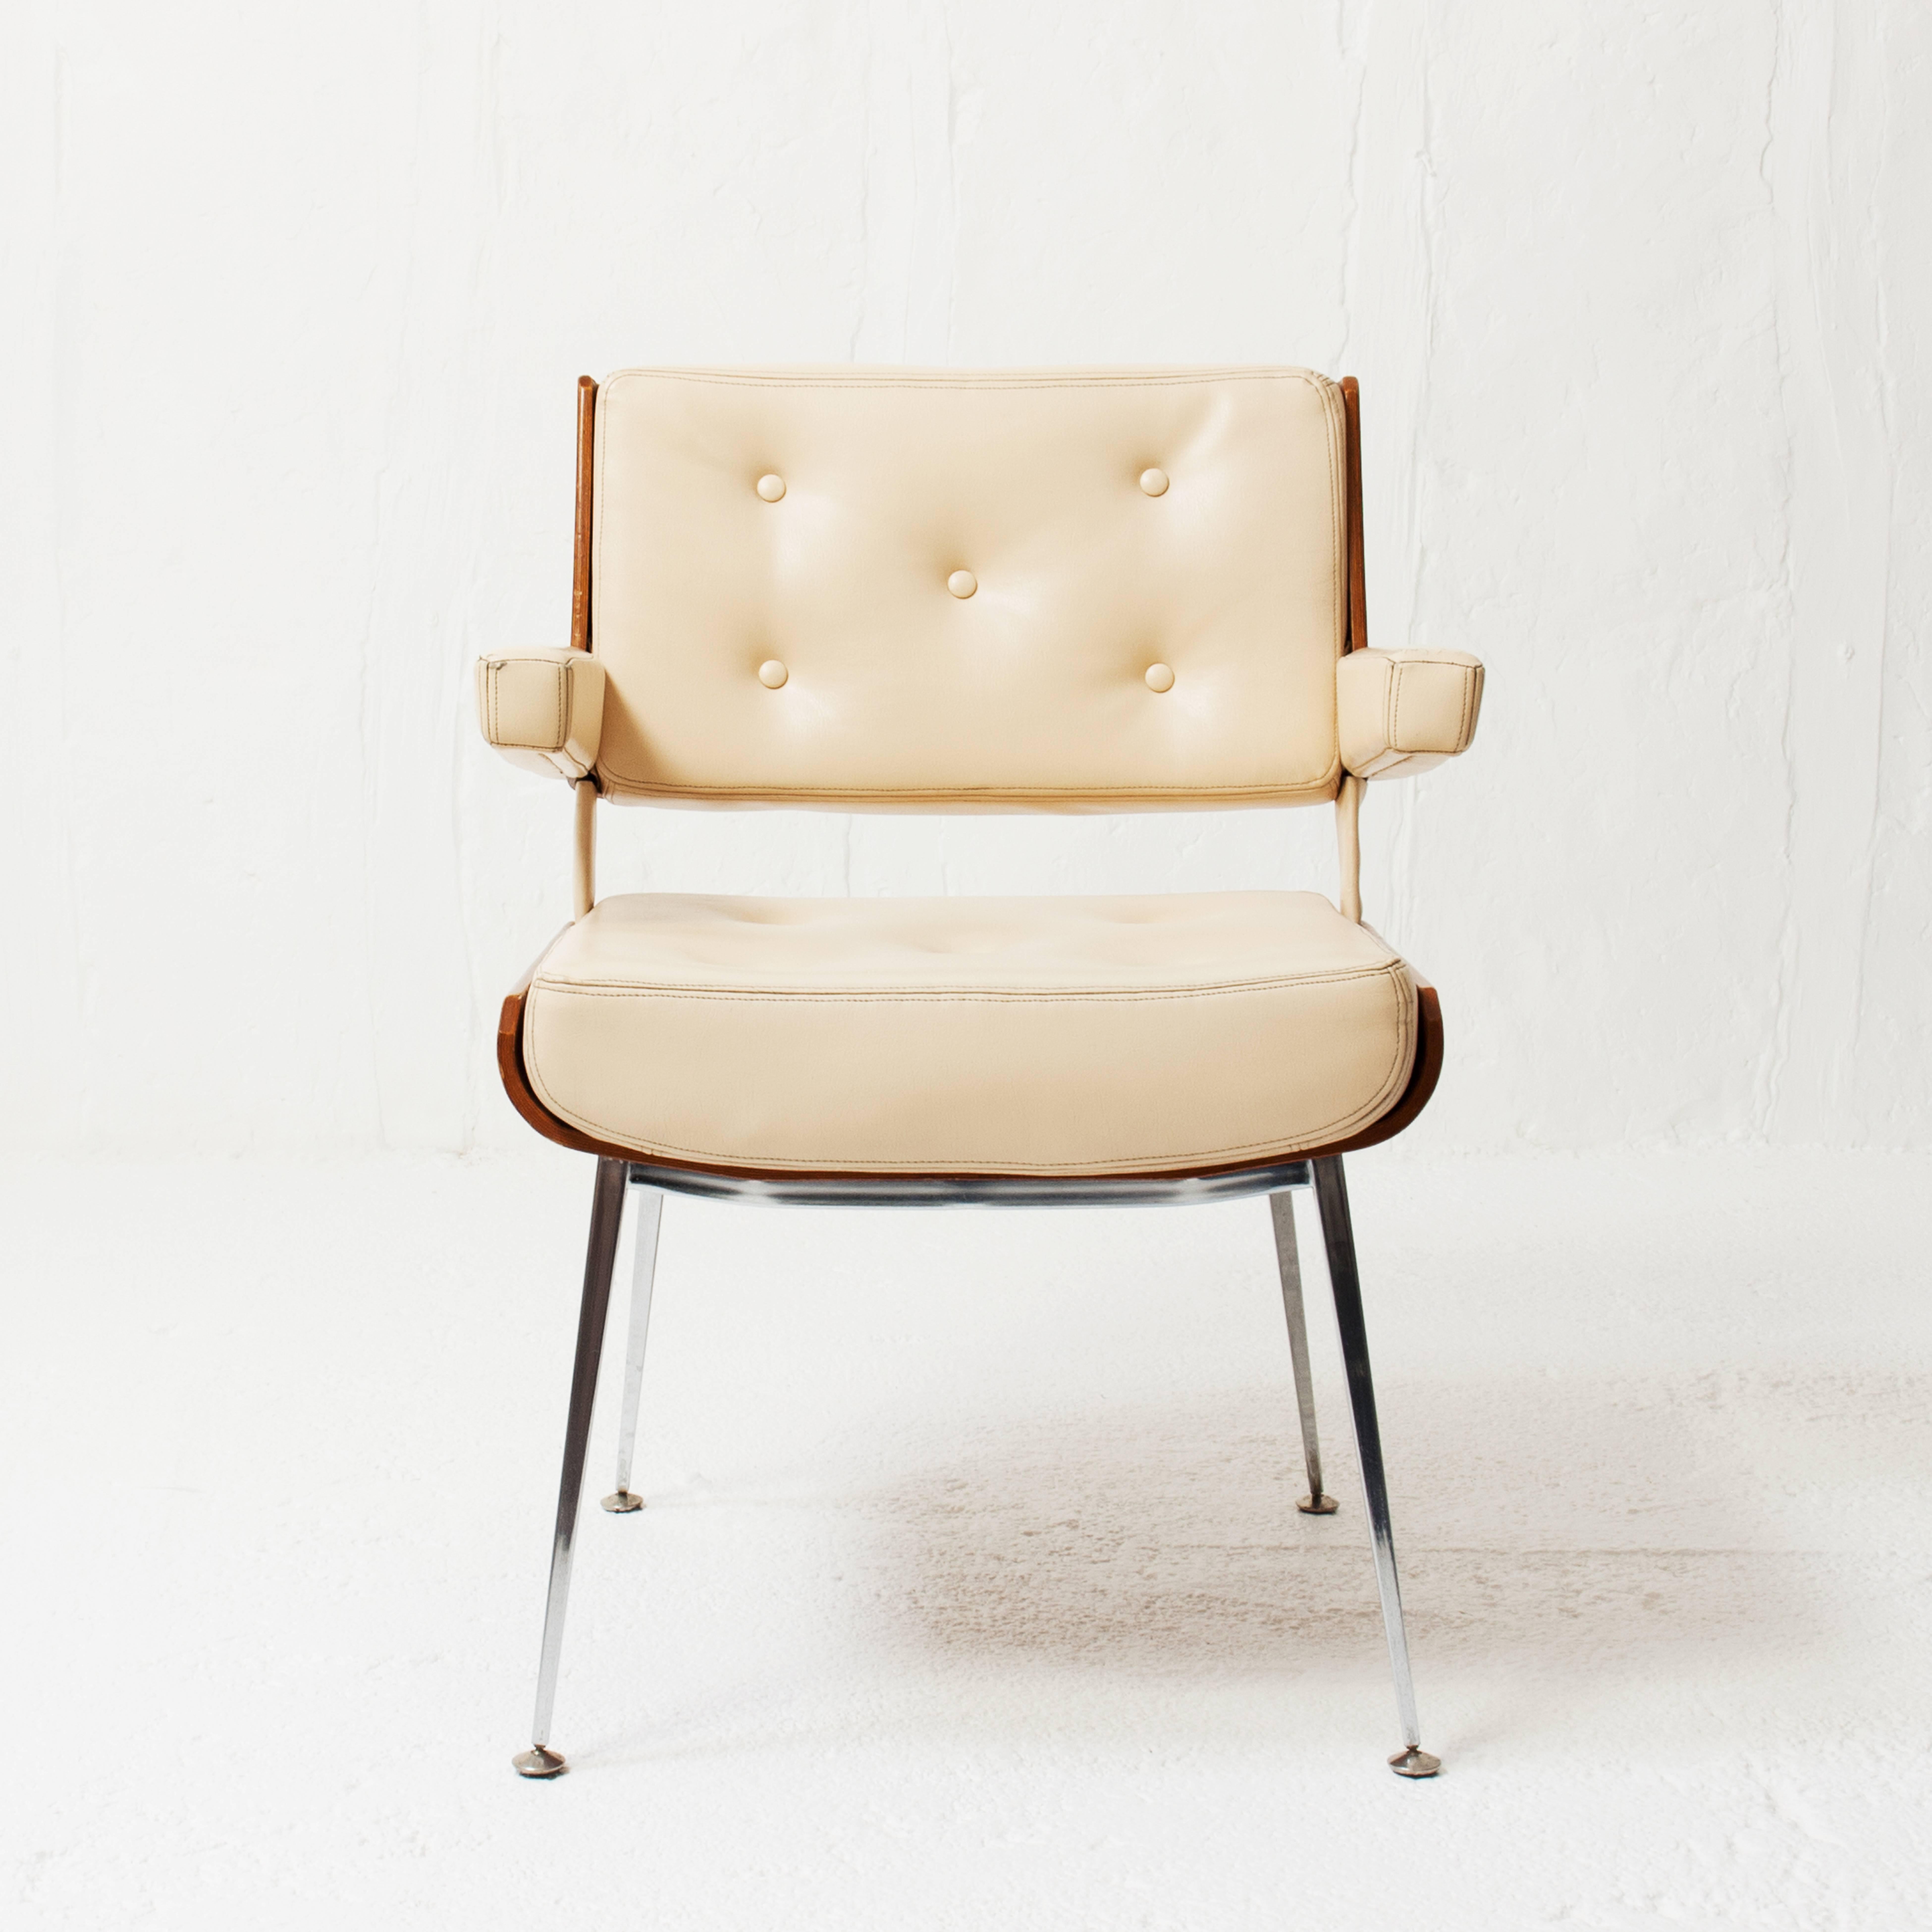 This armchair was designed by Alain Richard and produced in France during the 1970s. The frame is made of bent mahogany that sits on four straight chrome metal legs and is upholstered in a cream imitation leather.
Some traces of wear on the